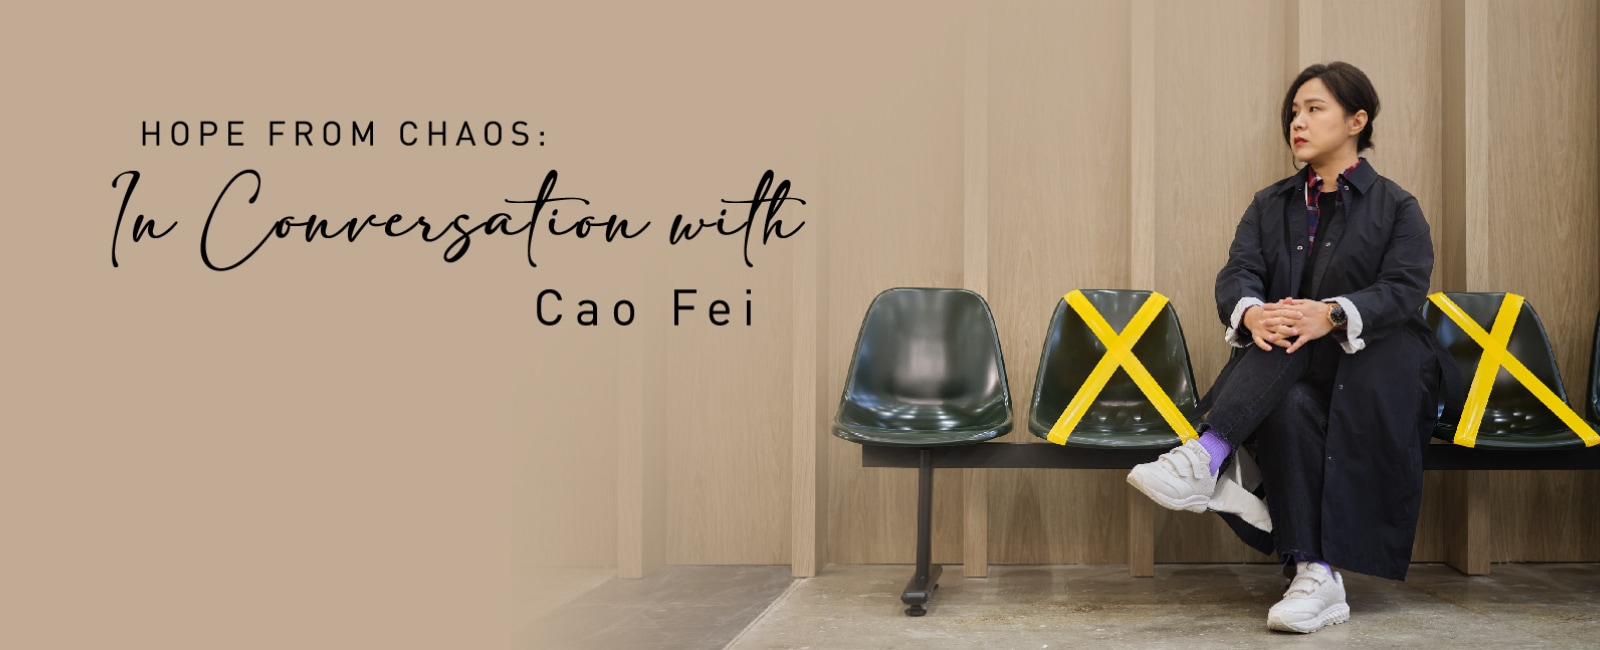 Hope from Chaos: In Conversation with Cao Fei